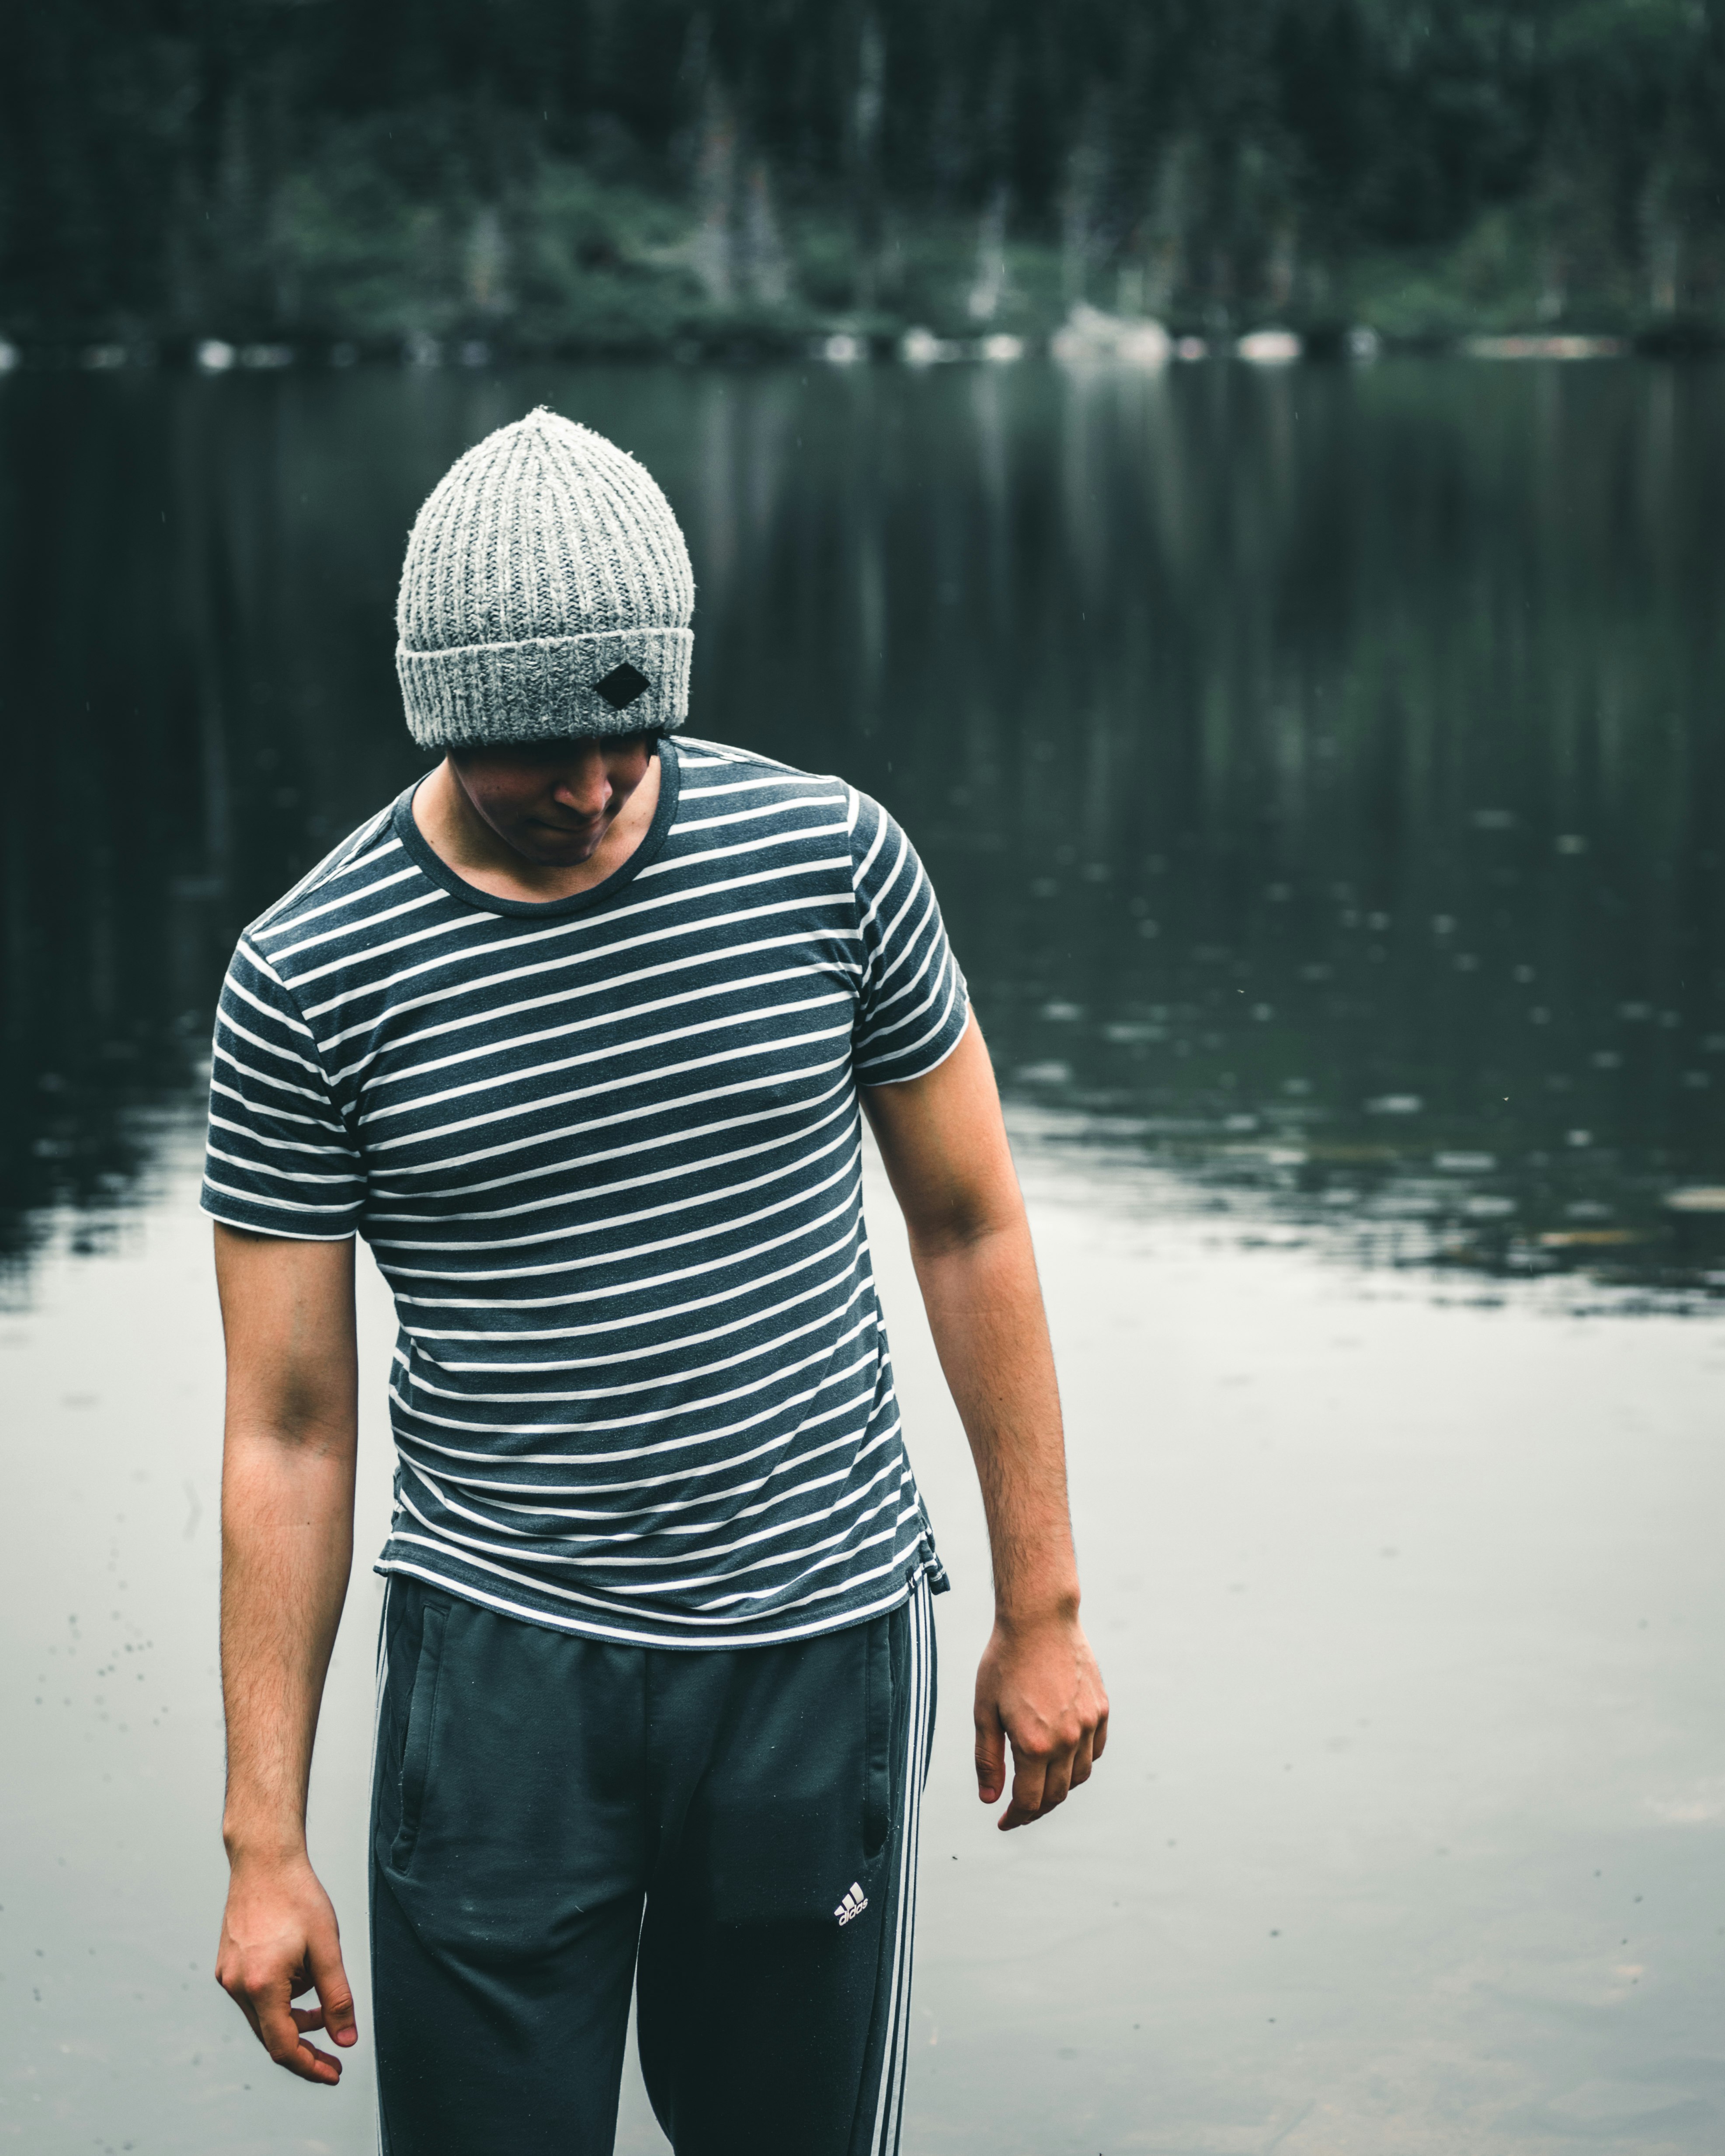 man in black and white striped shirt and gray shorts standing on water during daytime